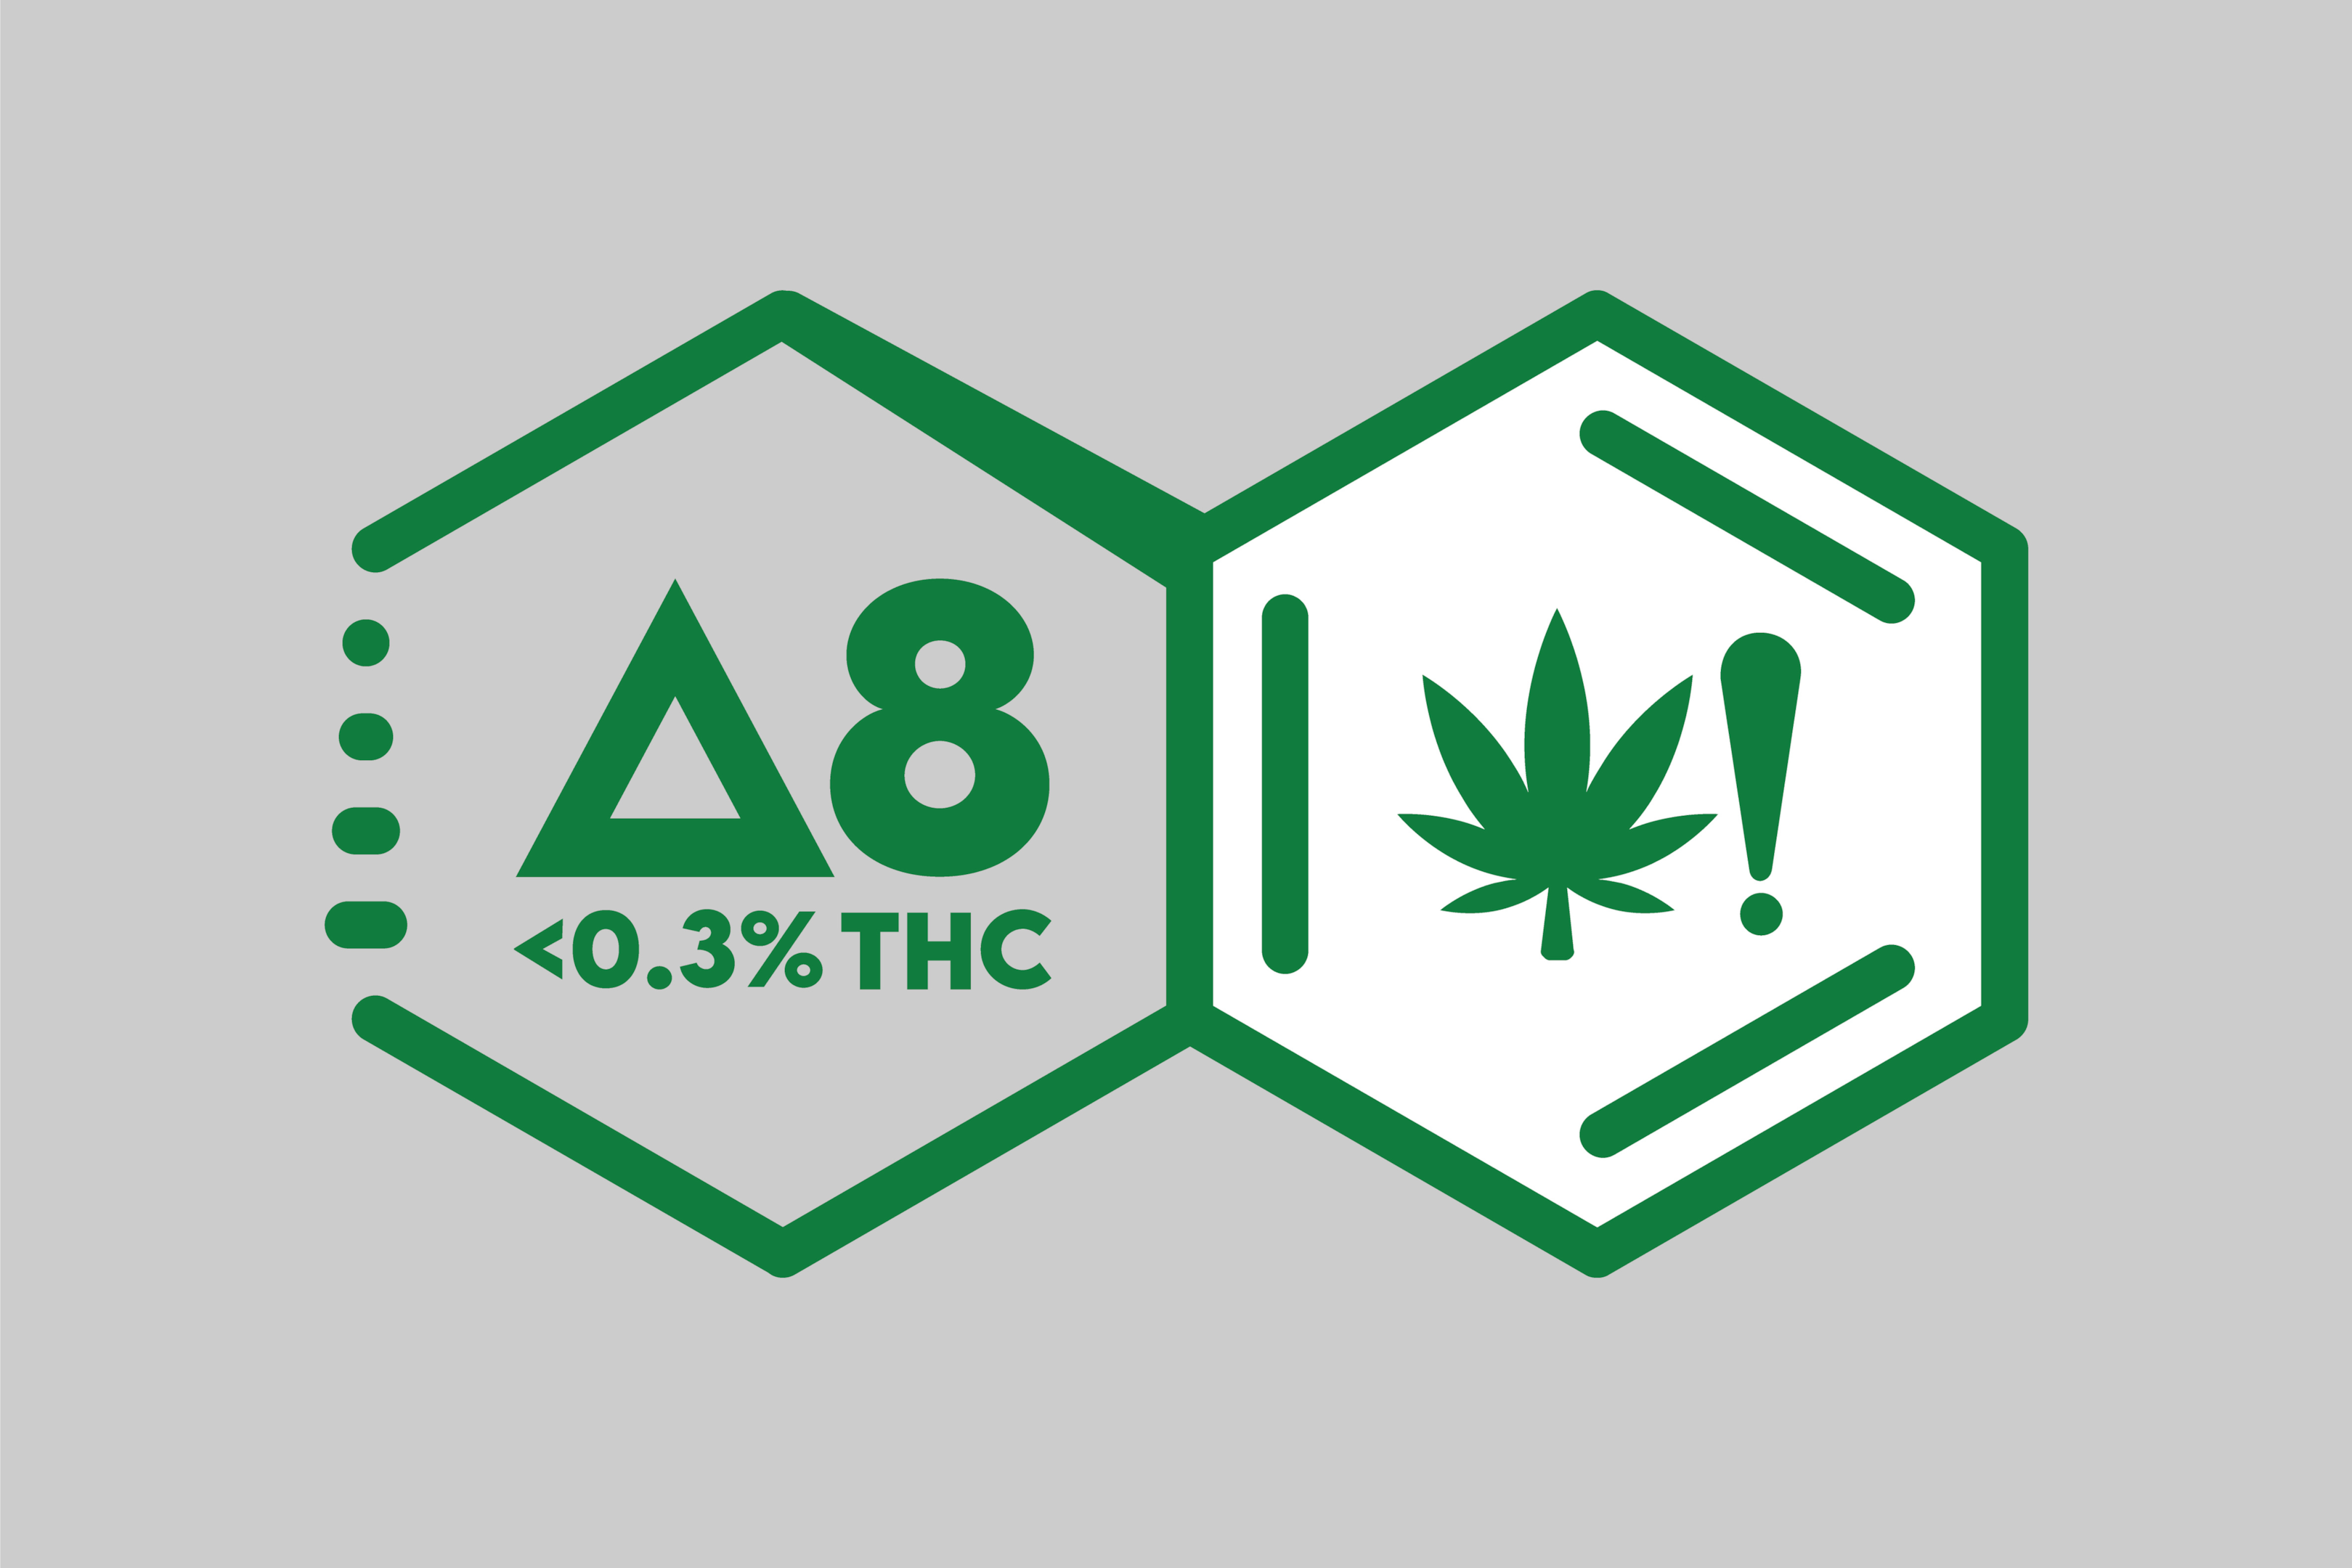 There are many Delta 8 products out there today, and consumers need to make sure they don't get products like Delta 8 edibles or others that are inaccurately labeled. Our Delta 8 edibles and all other products go through stringent processes that we've done more research on than other cannabis companies with Delta 8 products like Delta 8 edibles, vapes, and tinctures.